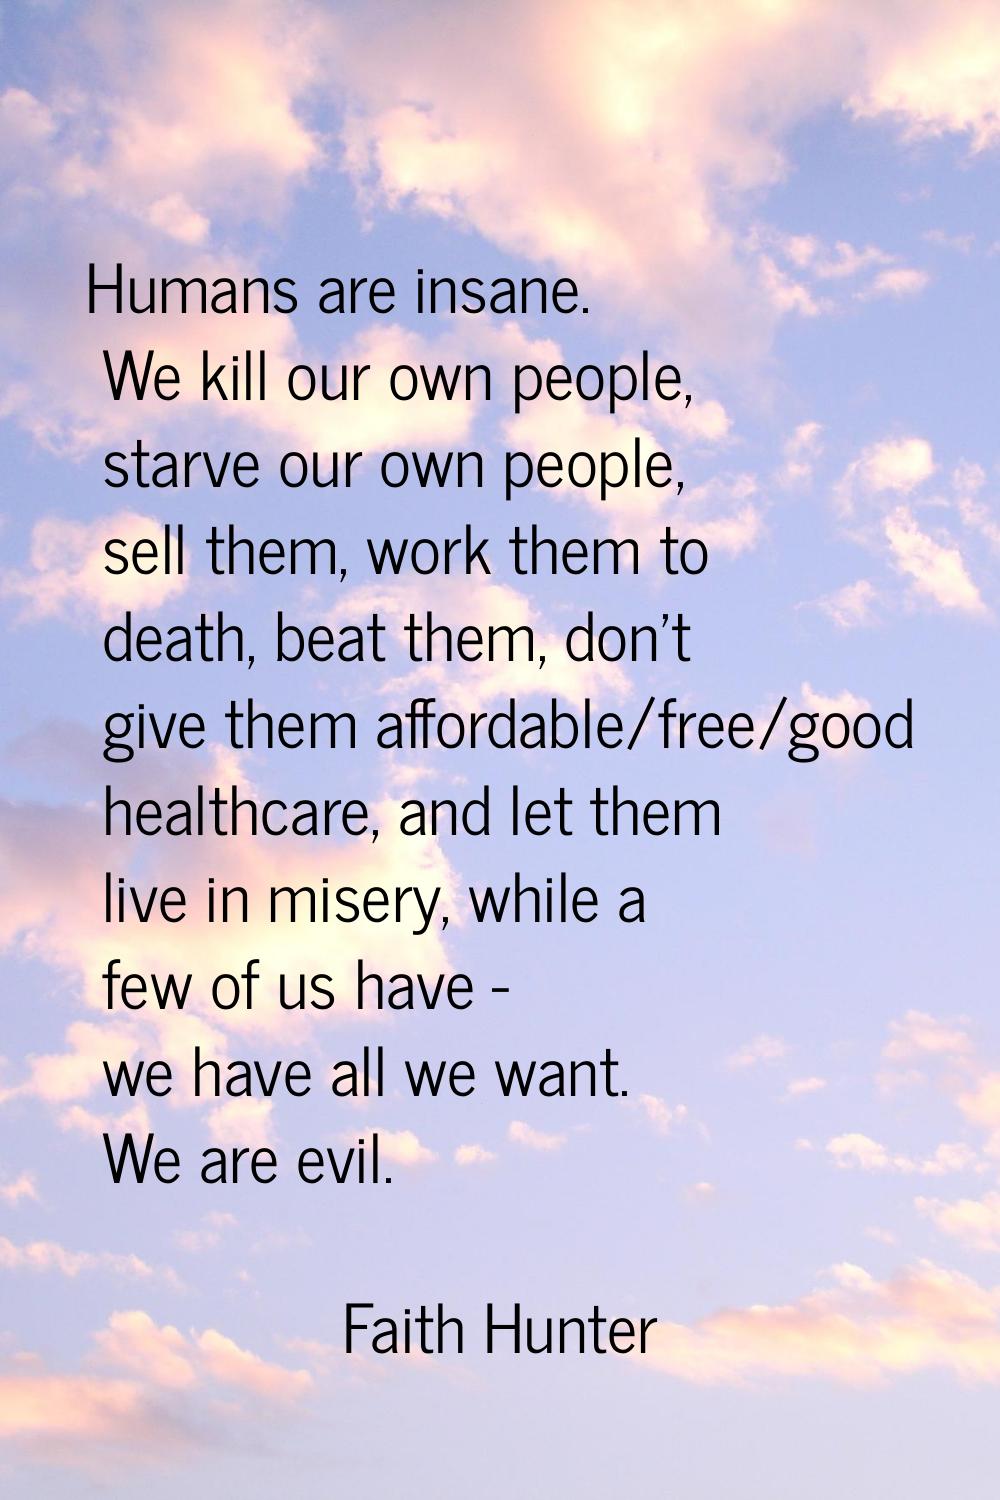 Humans are insane. We kill our own people, starve our own people, sell them, work them to death, be